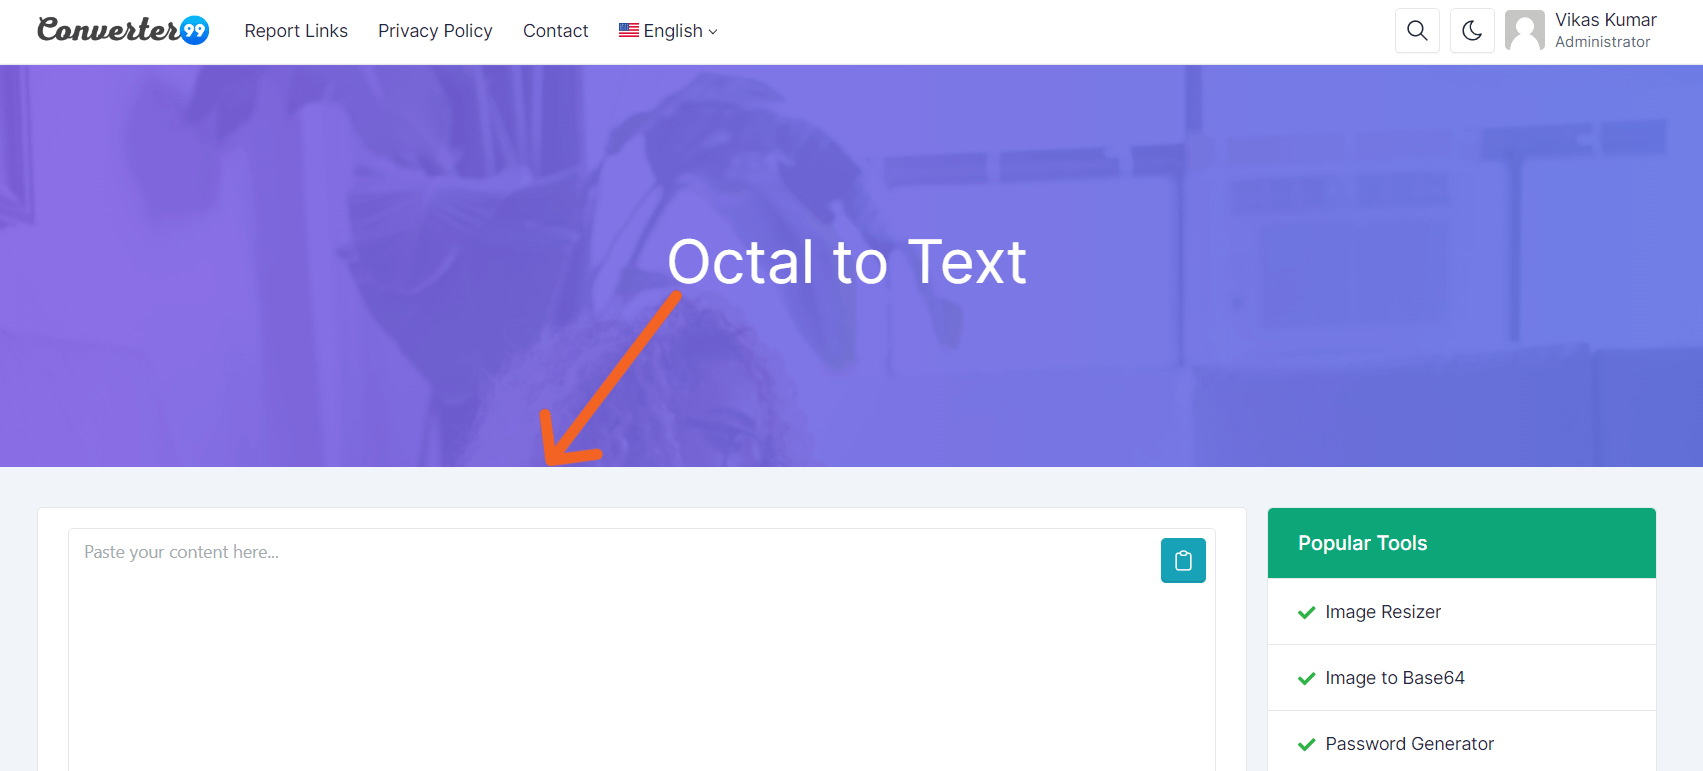 octal-to-text